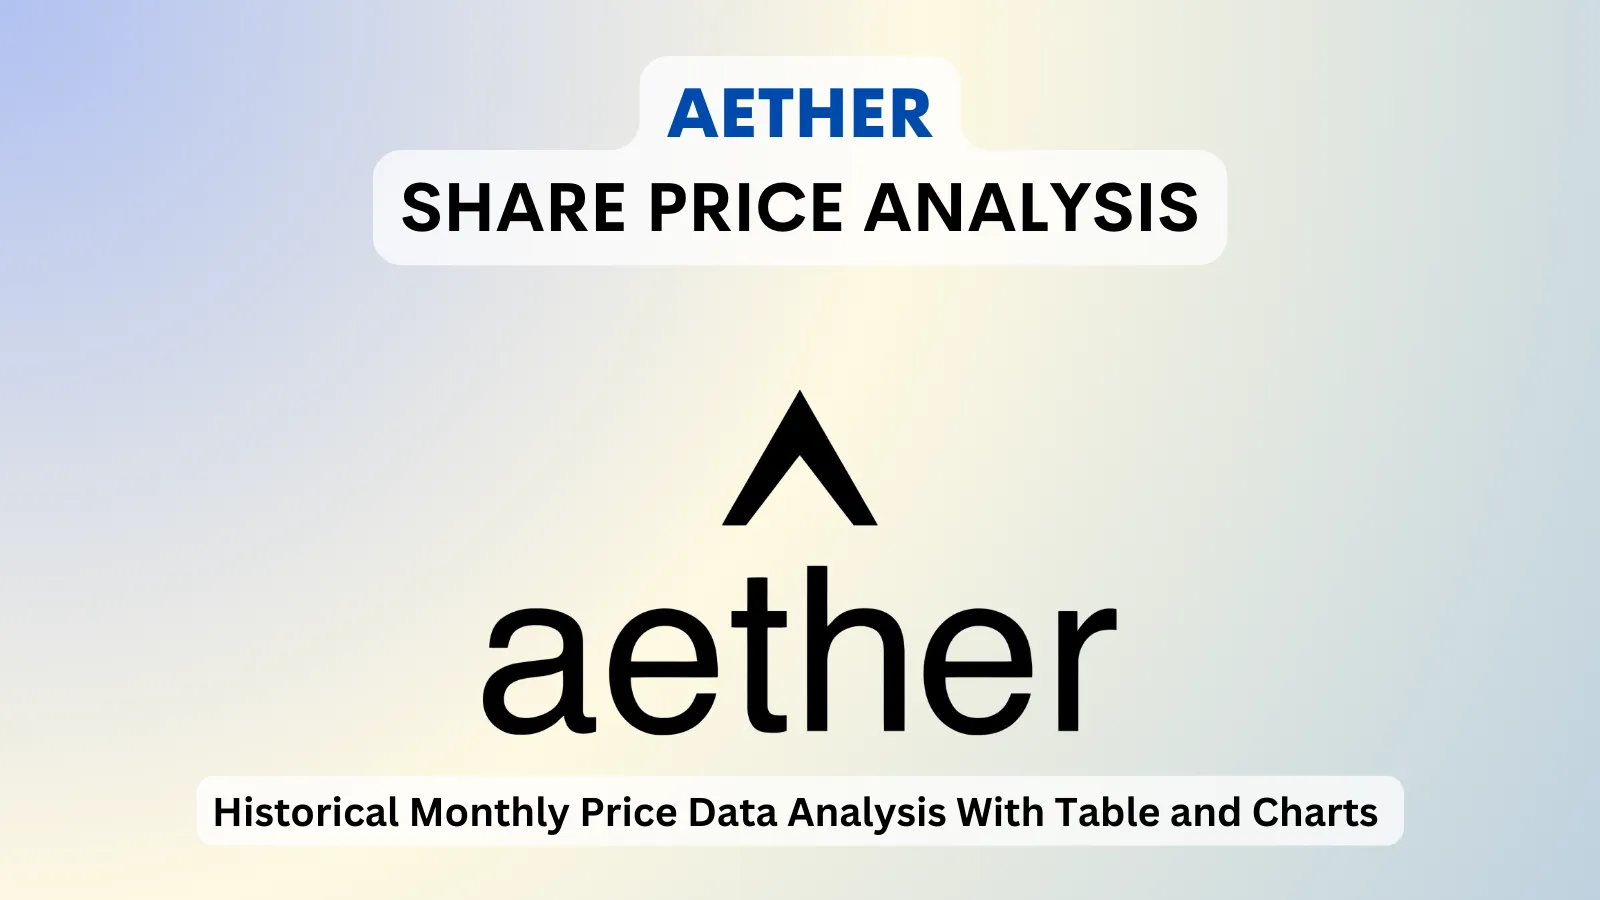 Aether share price analysis